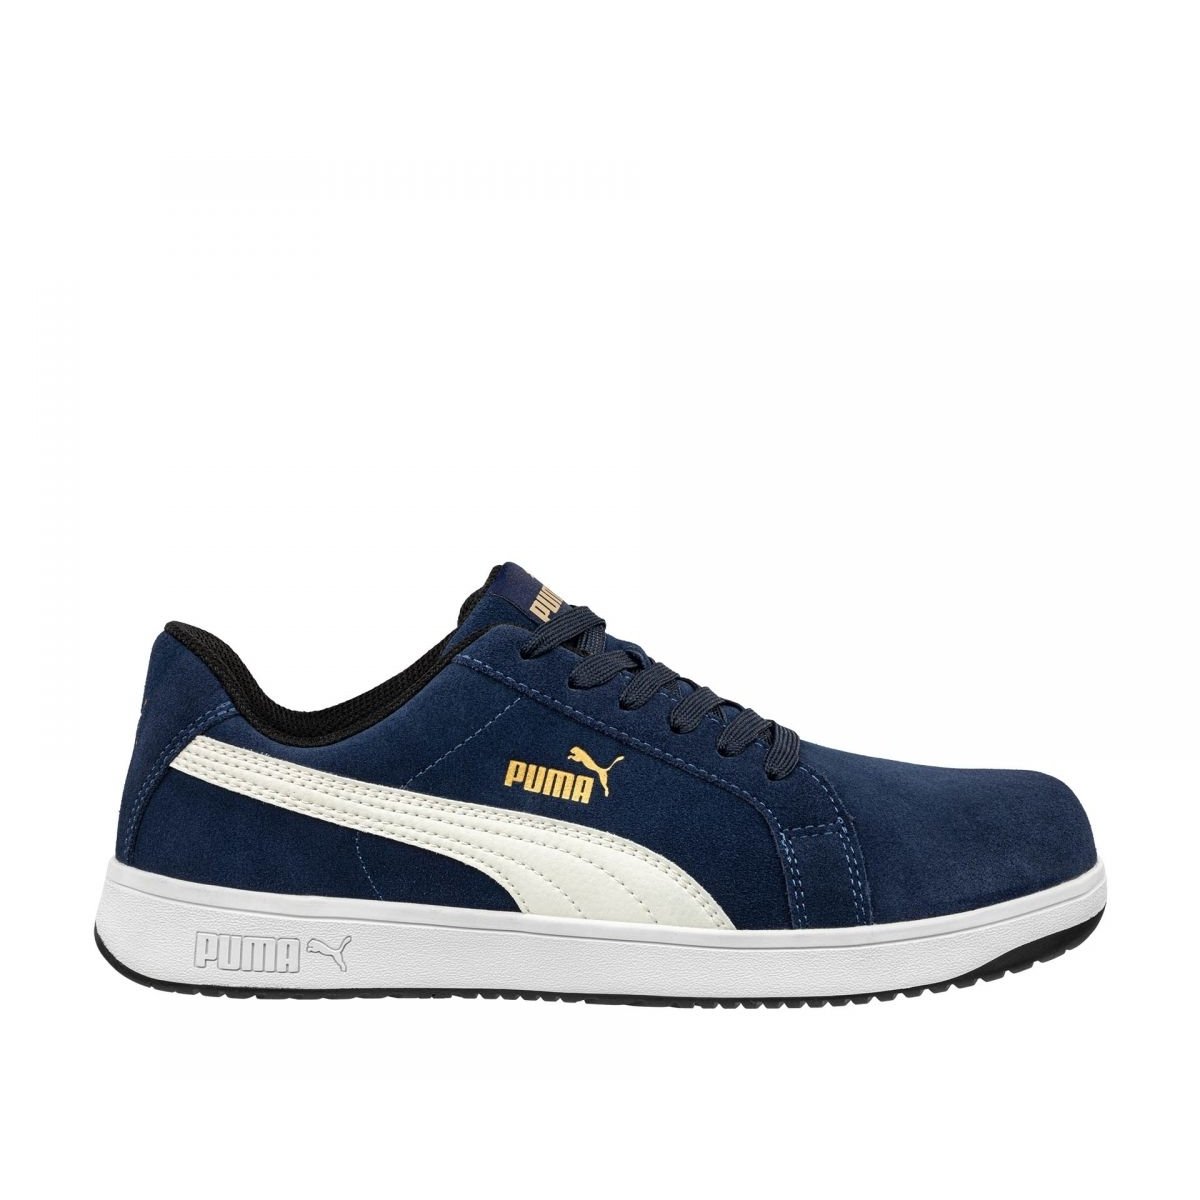 PUMA Safety Men's Iconic Low Composite Toe EH Work Shoes Navy Suede - 640025 ONE SIZE Navy - Navy, 9.5